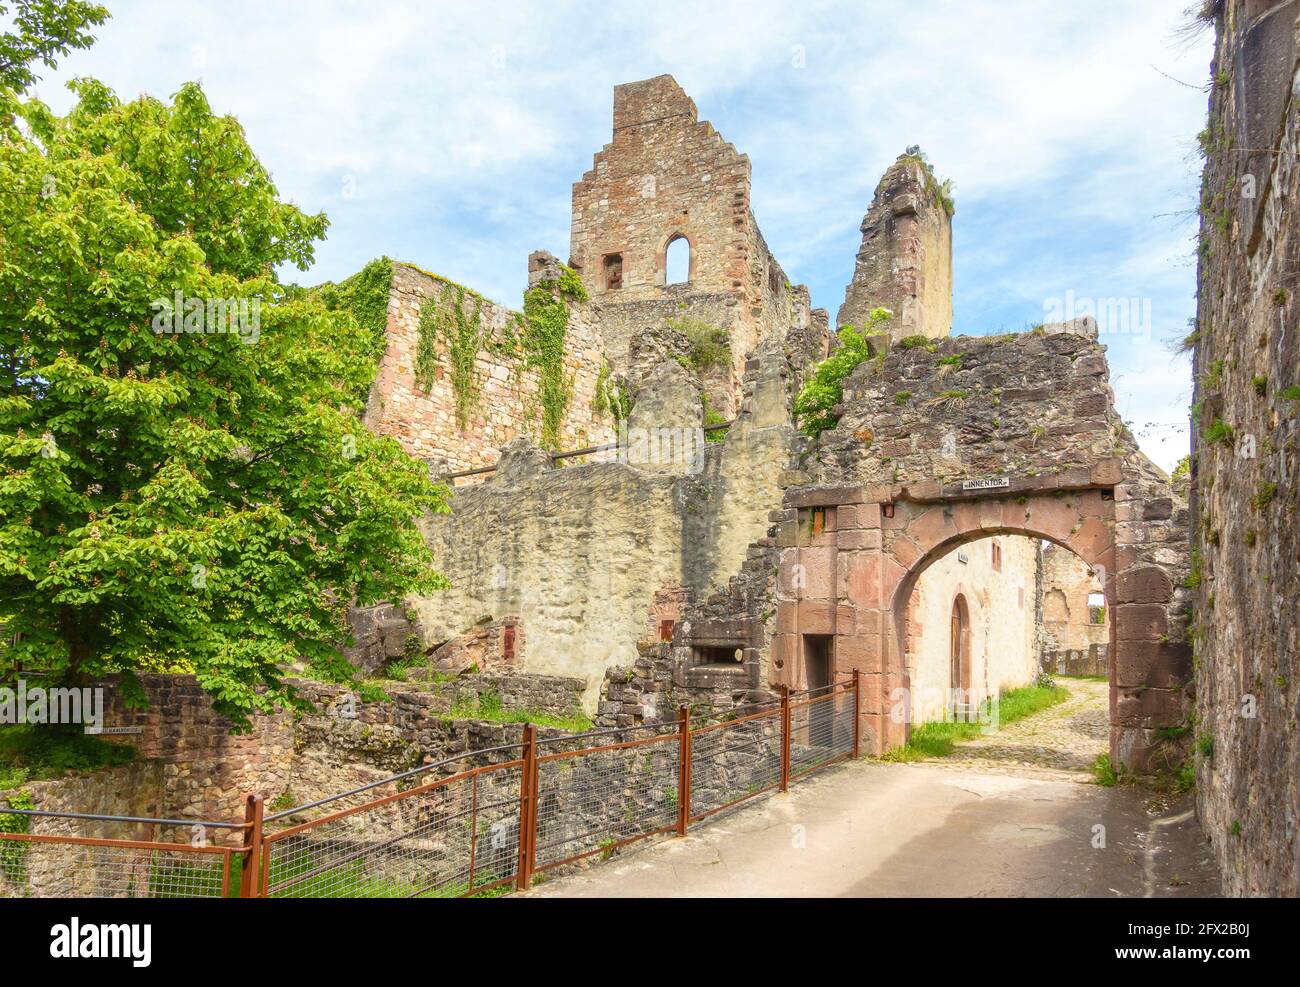 Hochburg Castle, near Emmendingen at the foothills of the Black Forest, is one of the largest ruined castles in the Upper Rhine Valley Stock Photo